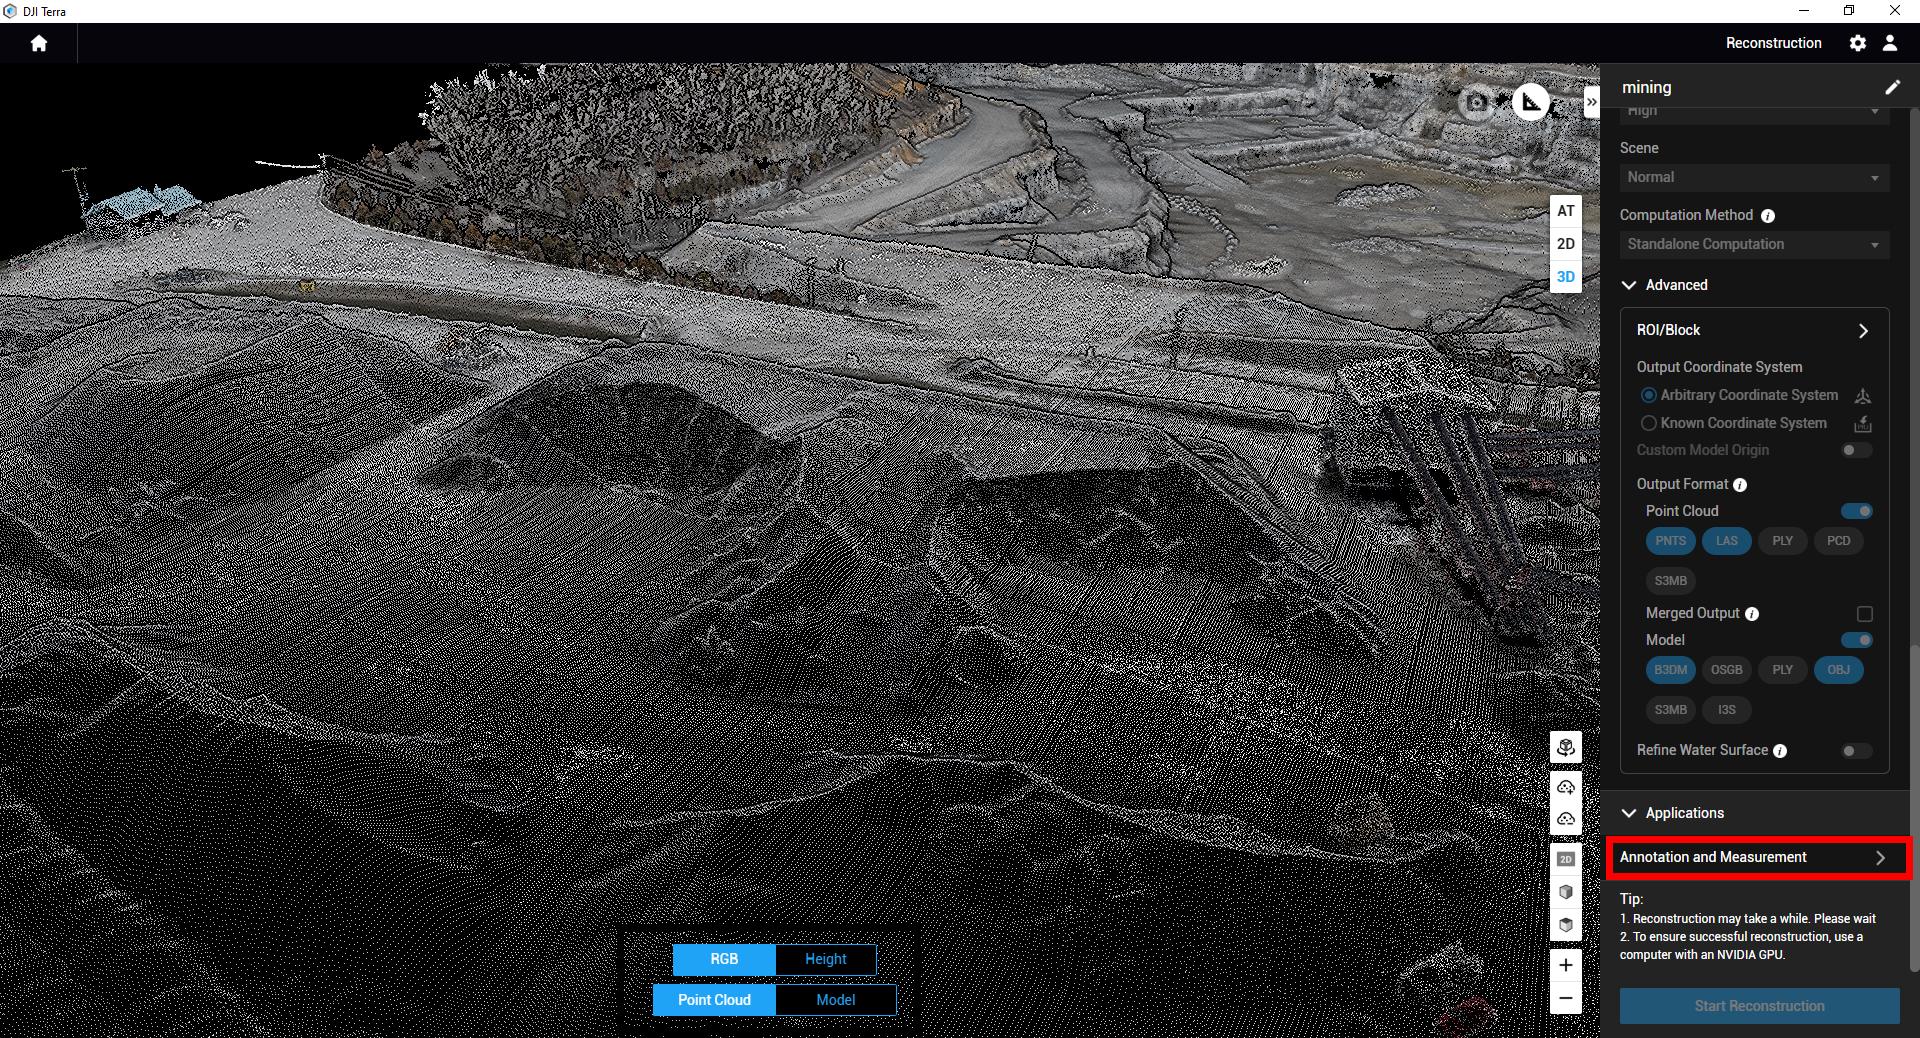 Stockpile Measurements with DJI Enterprise Drones and DJI Terra - Annotations and Measurement